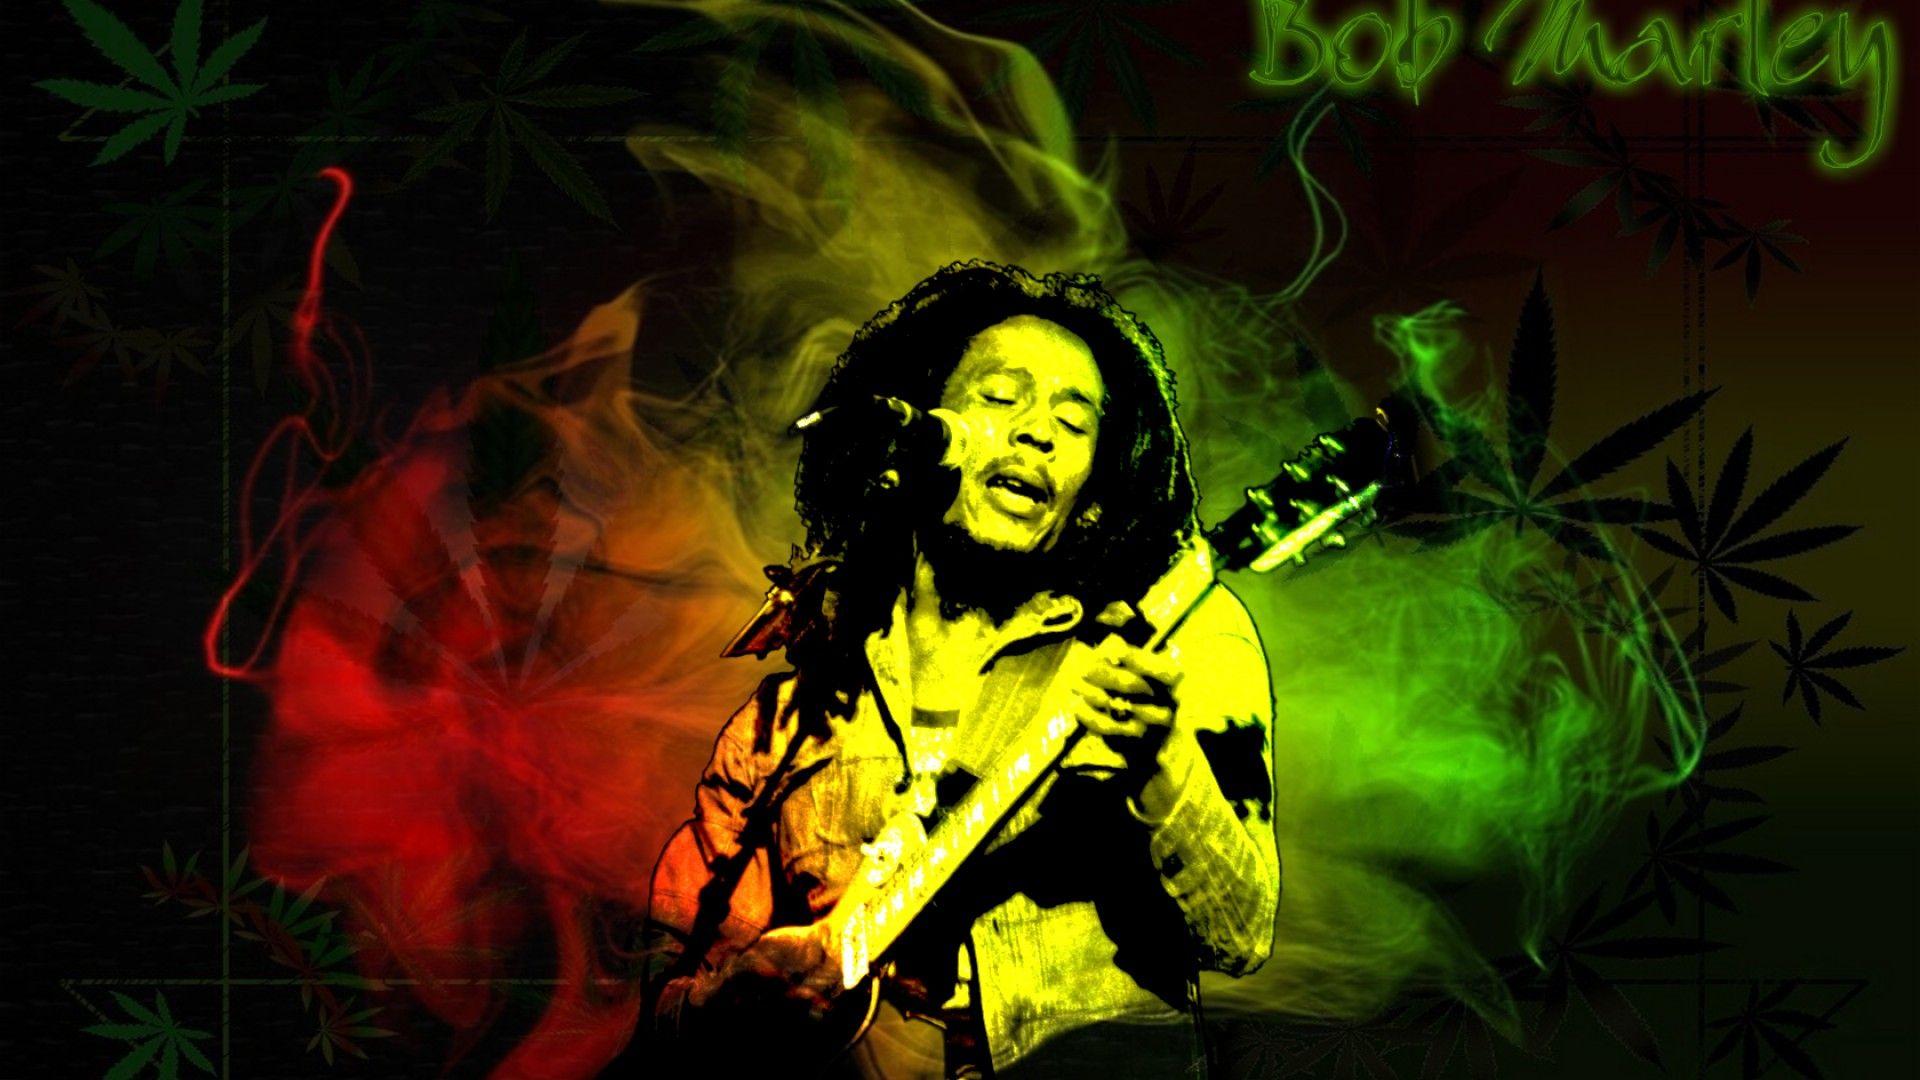 Widescreen Bobs Love And On Download One By Bob Marley High Quality